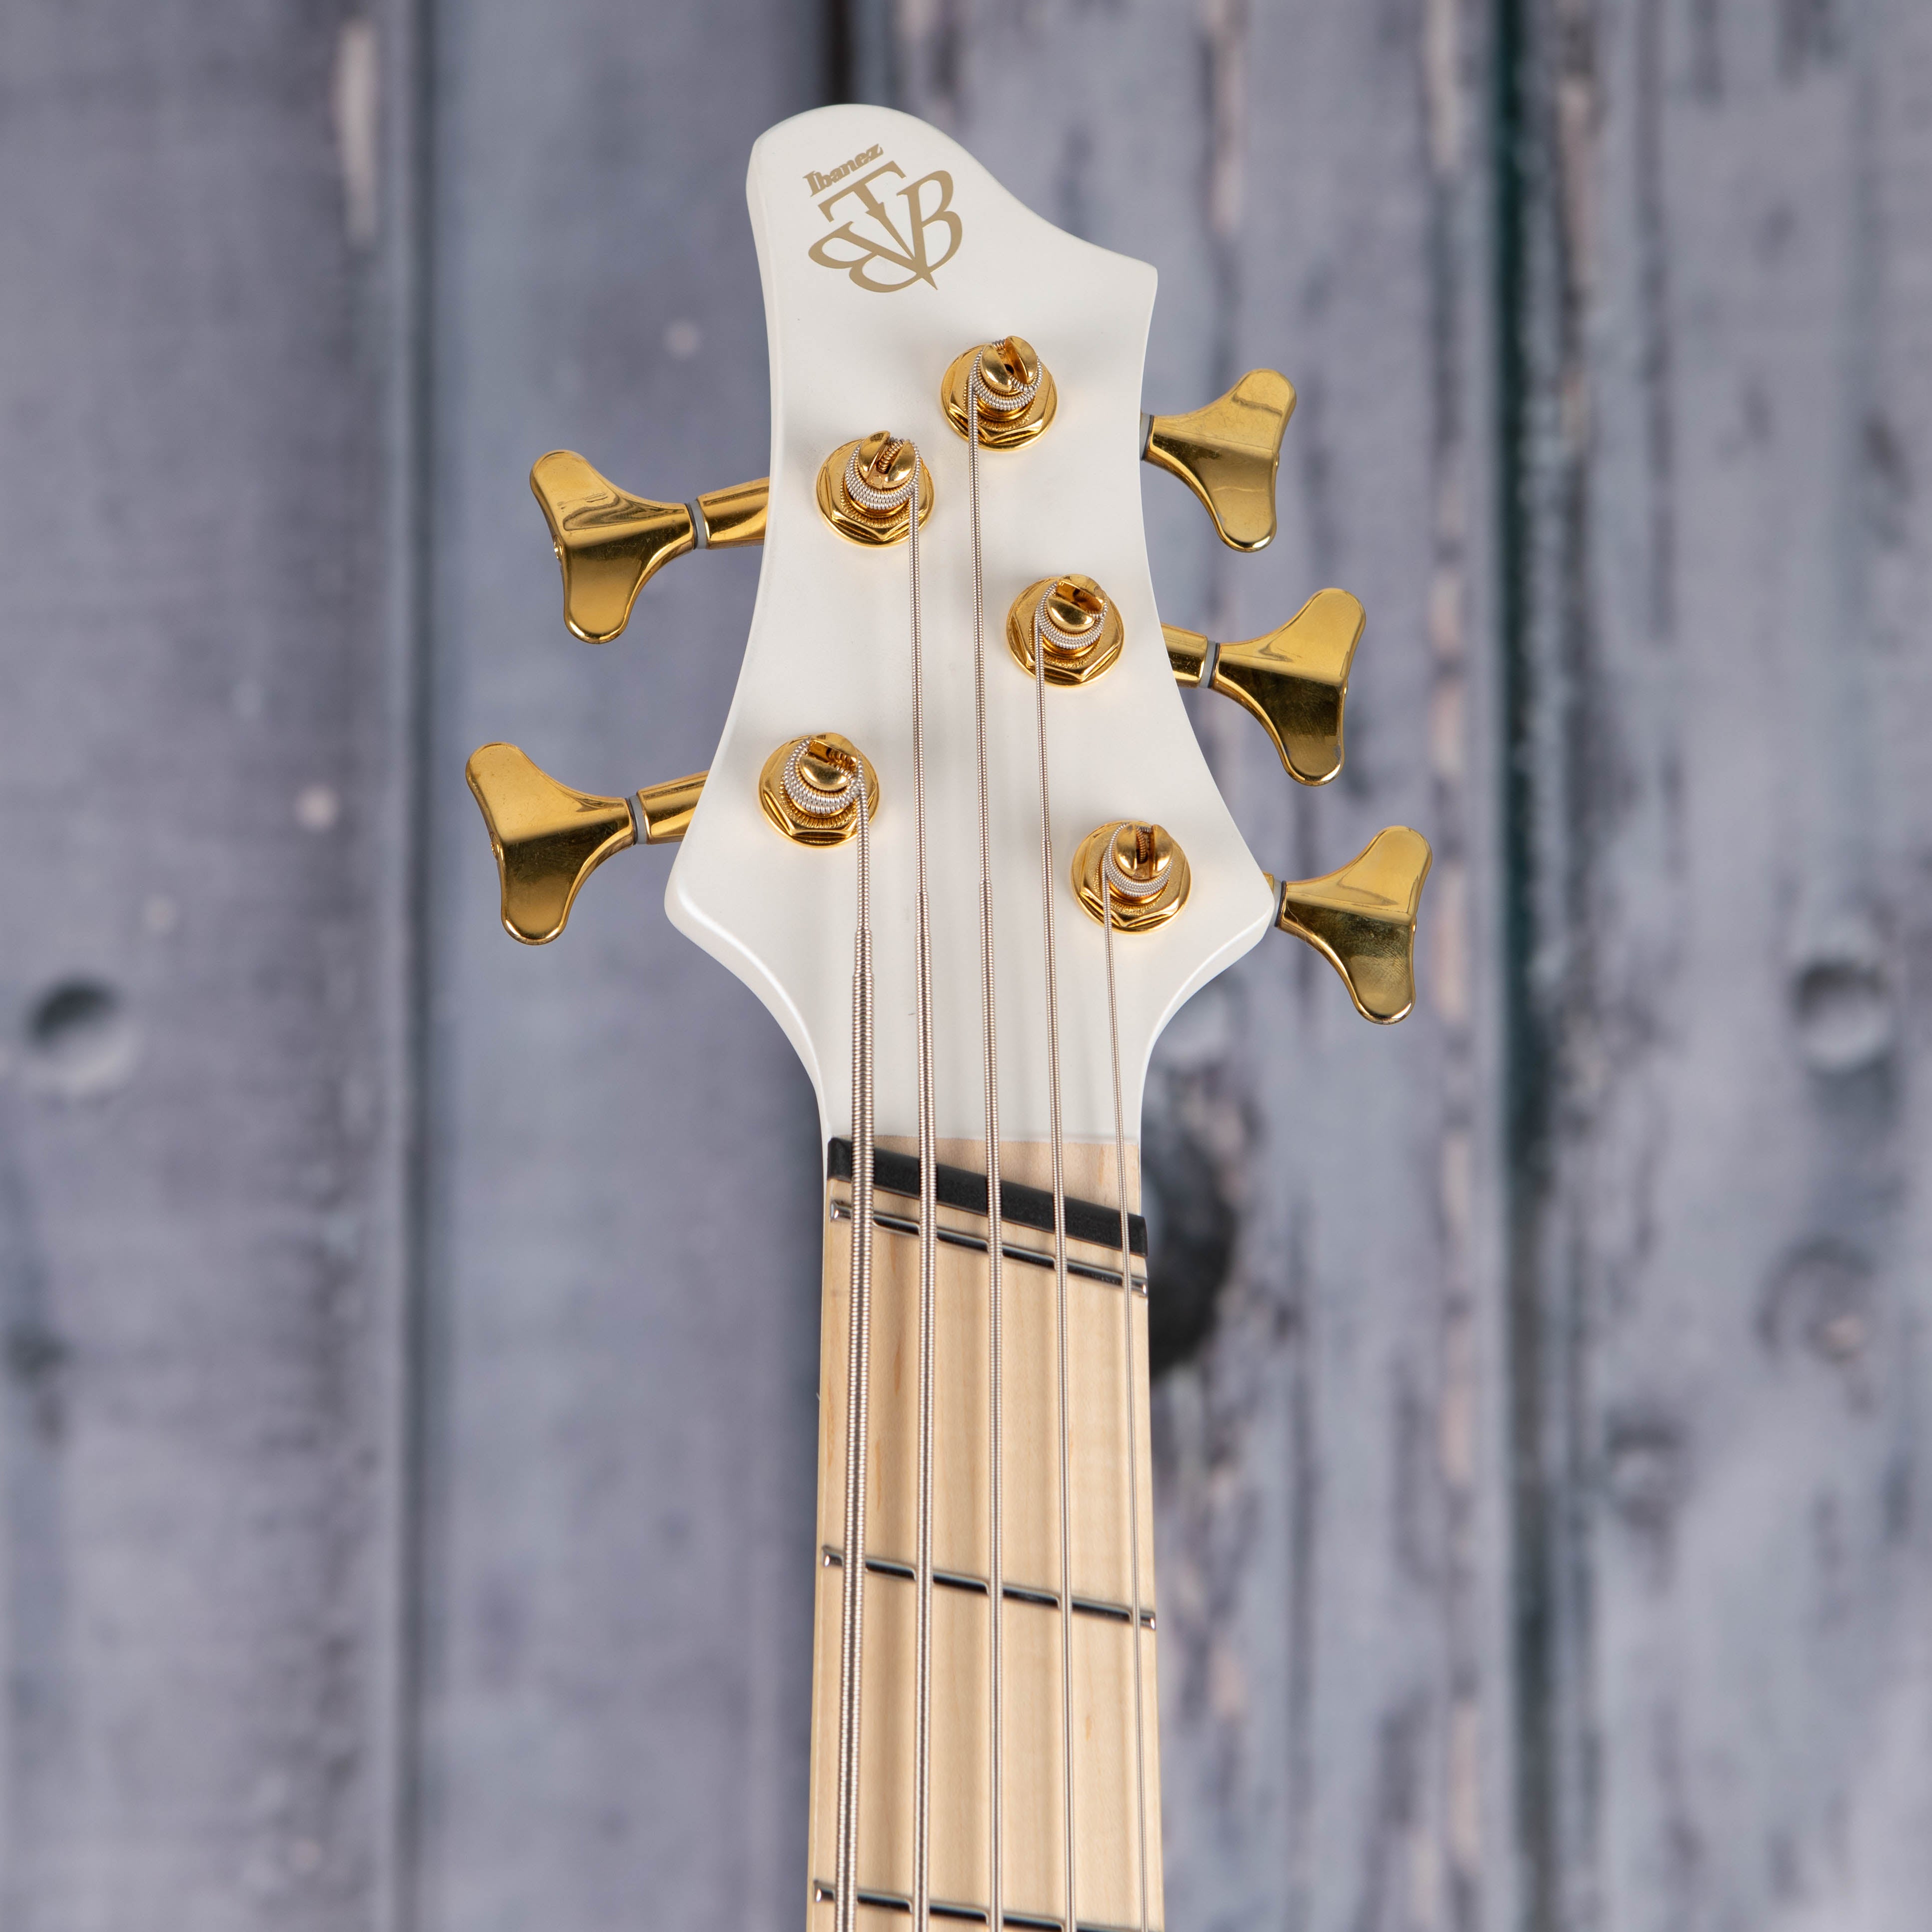 Ibanez BTB605MLM Bass Workshop Multi-Scale 5-String Electric Bass Guitar, Pearl White Matte, front headstock